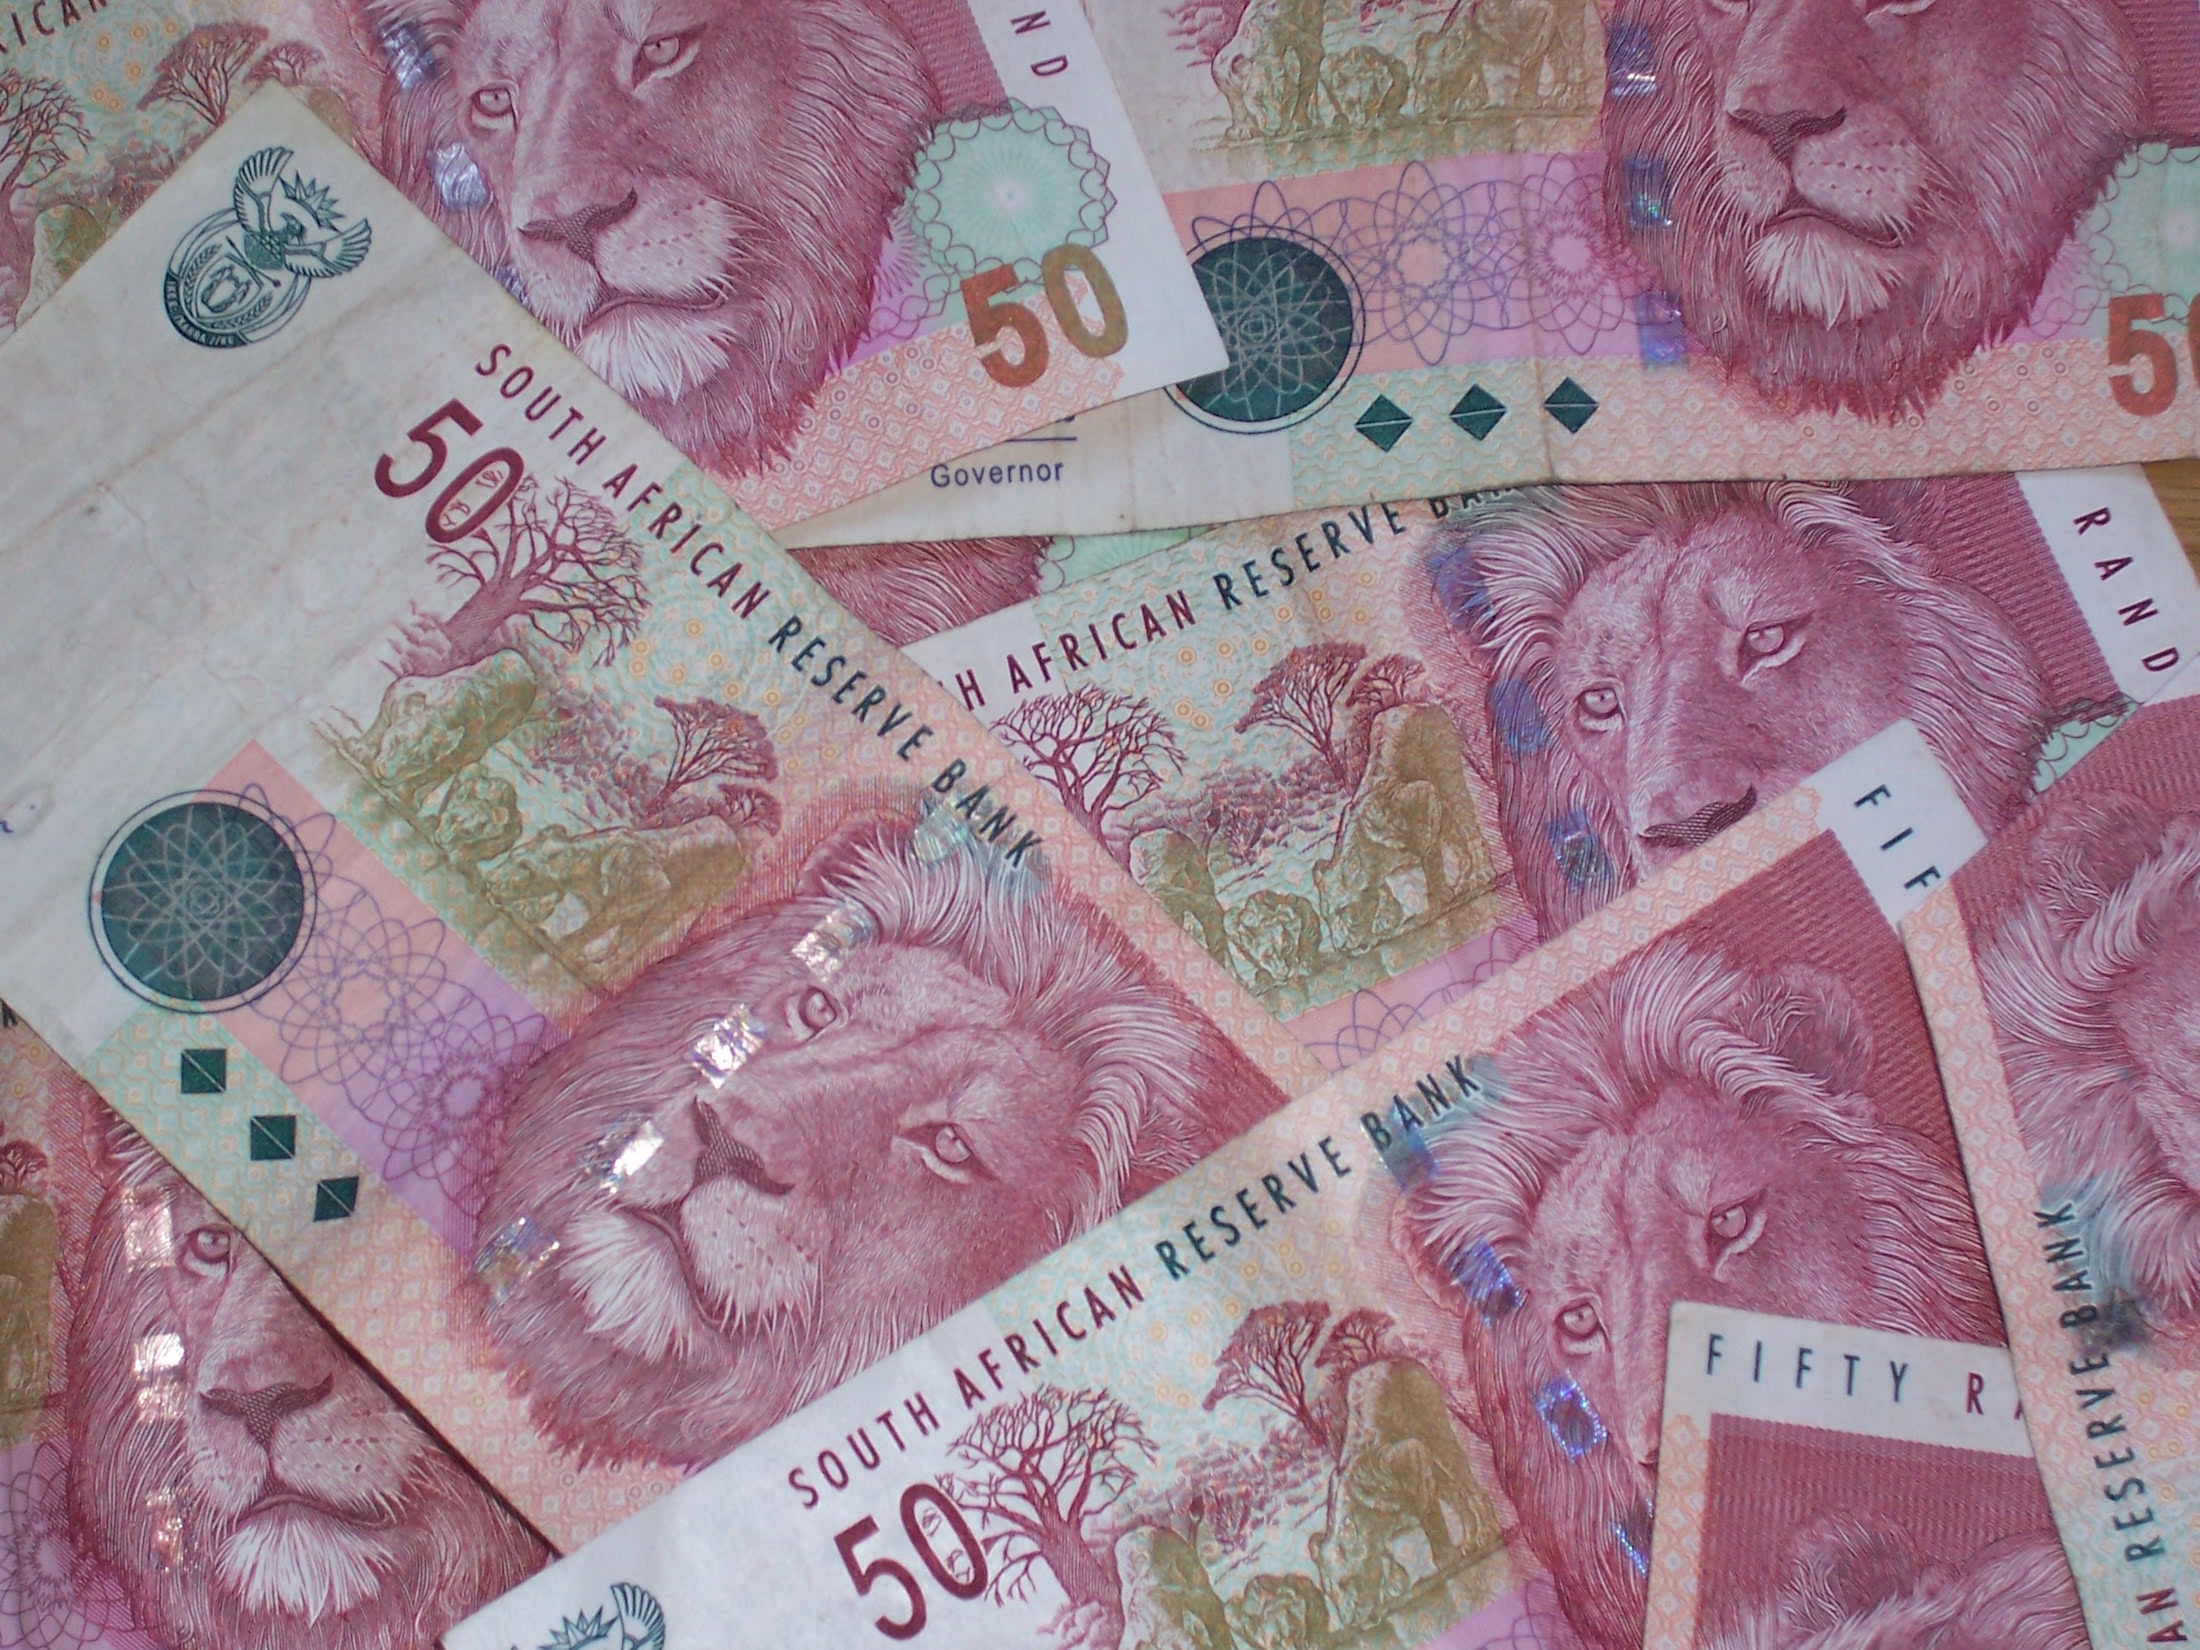 south african currency